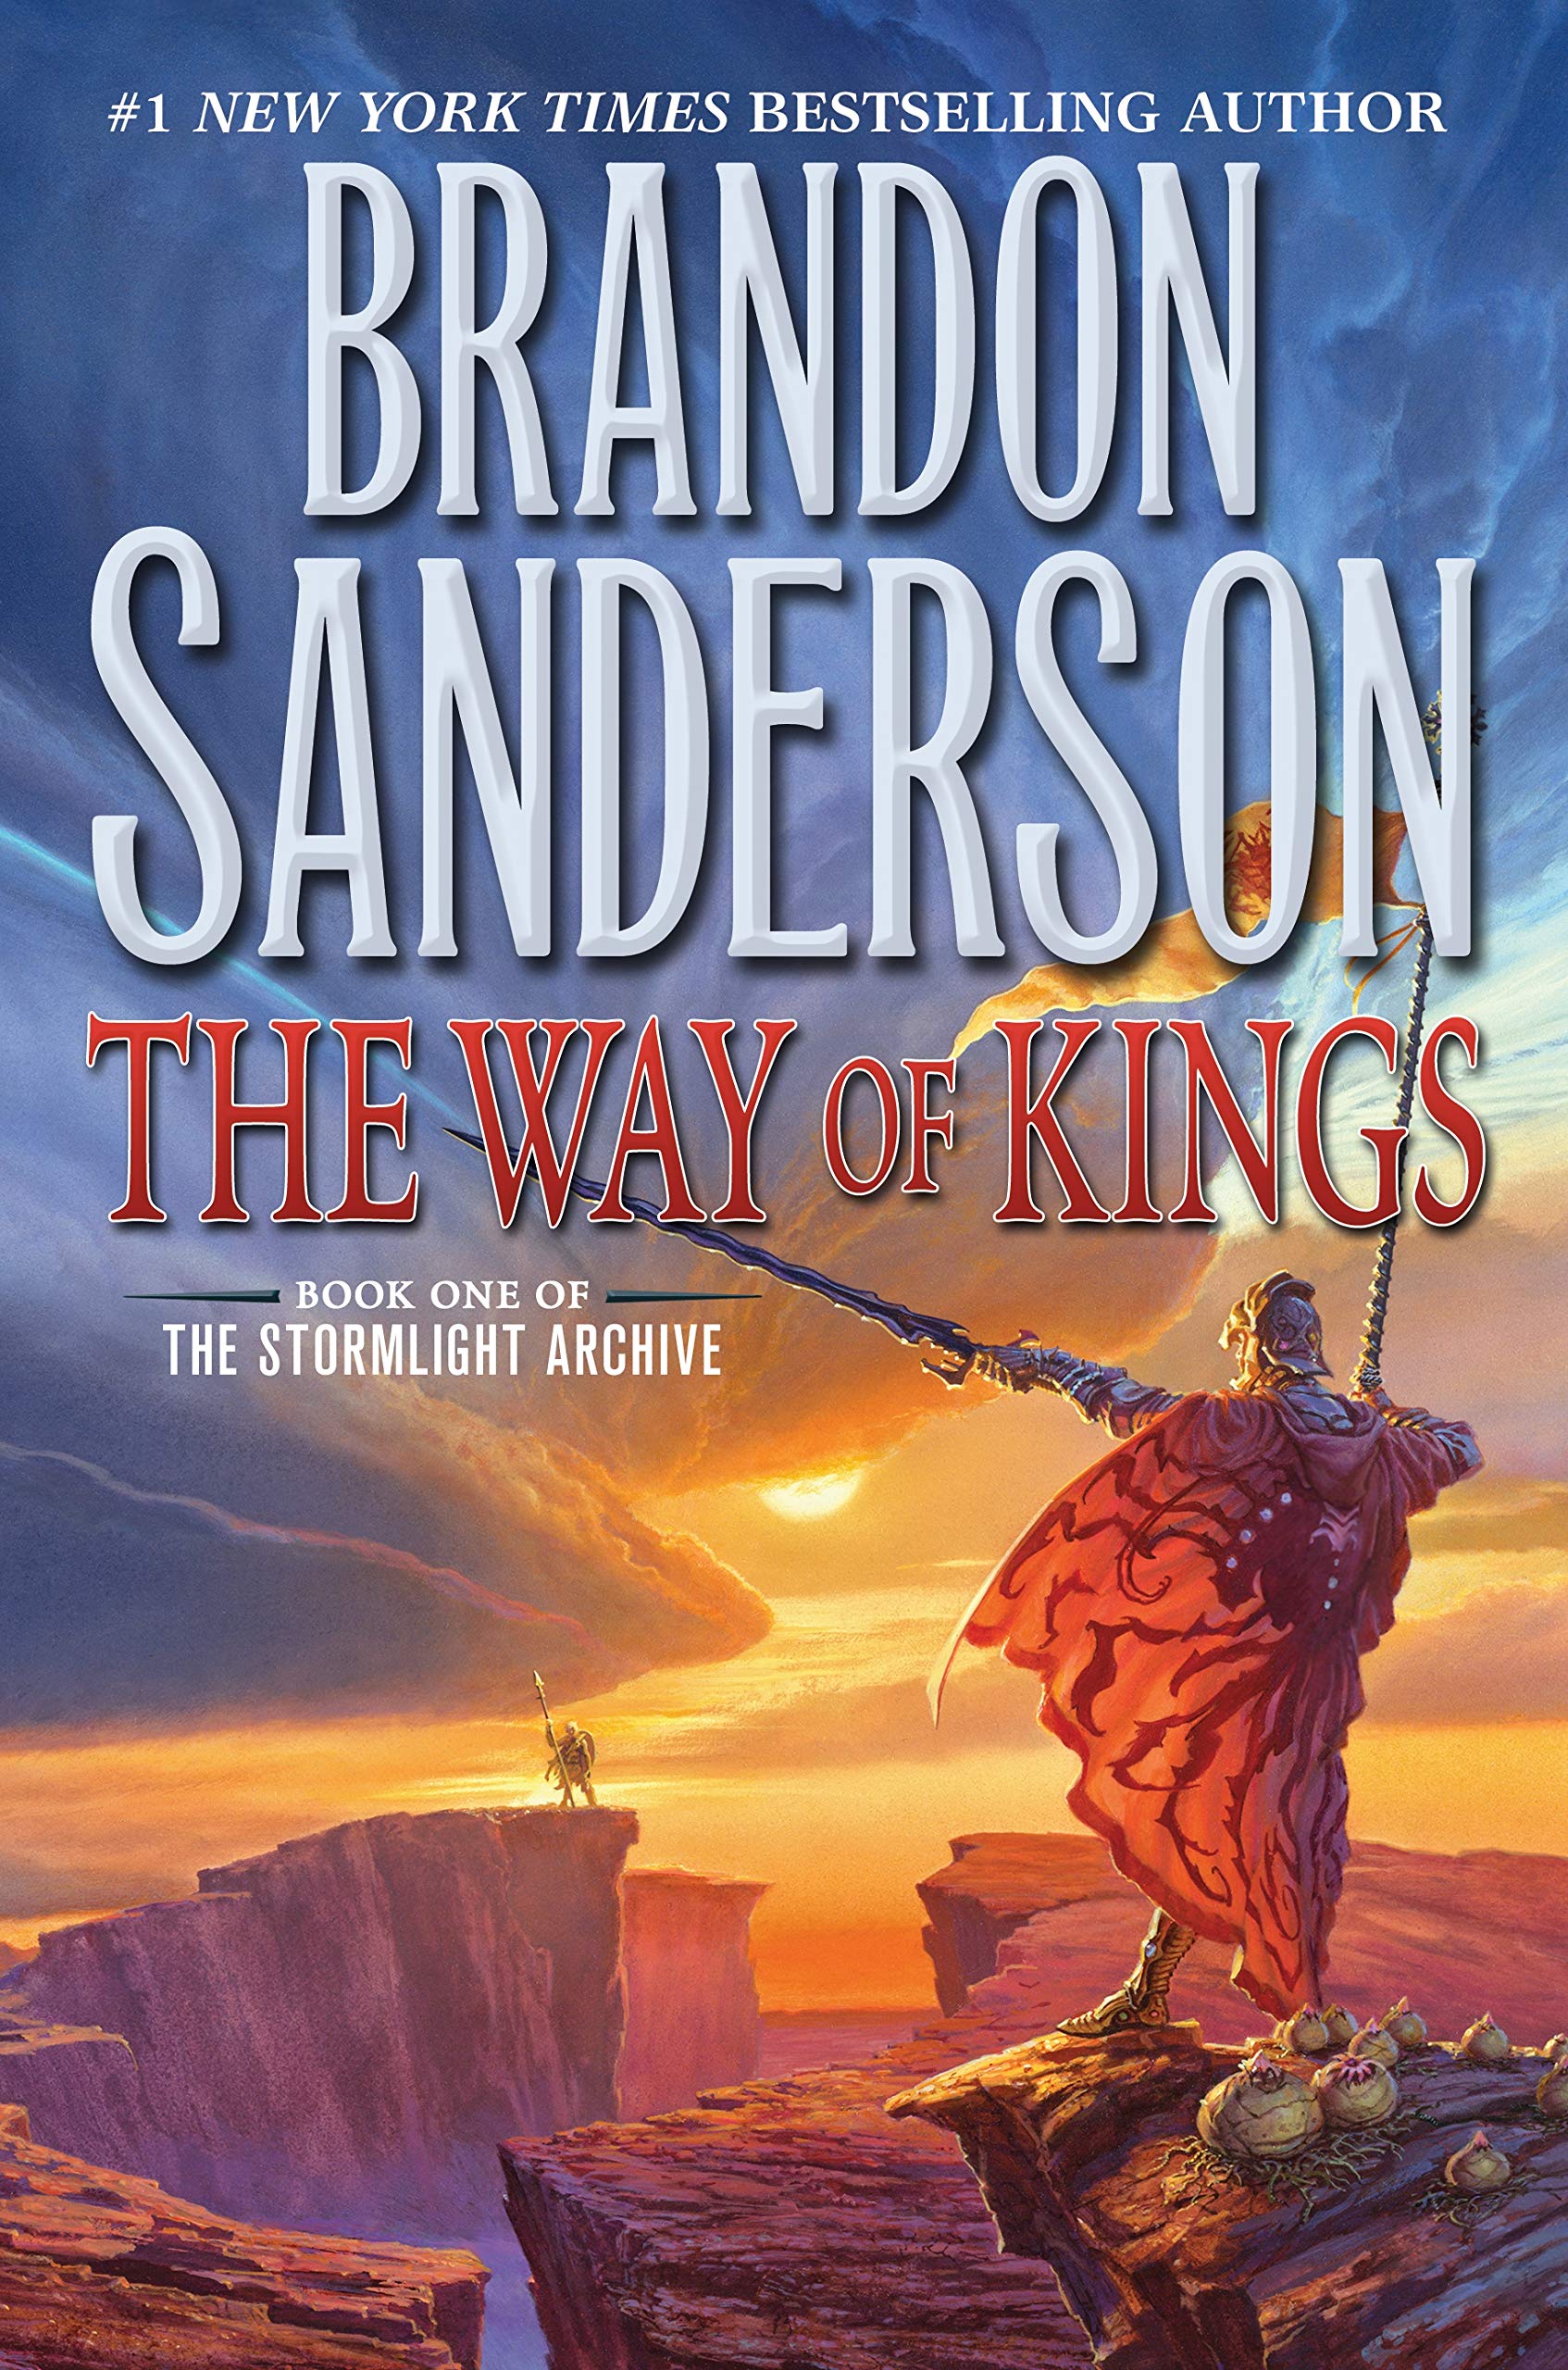 The Way of Kings - 20 Best Fantasy Books of the Last Decade